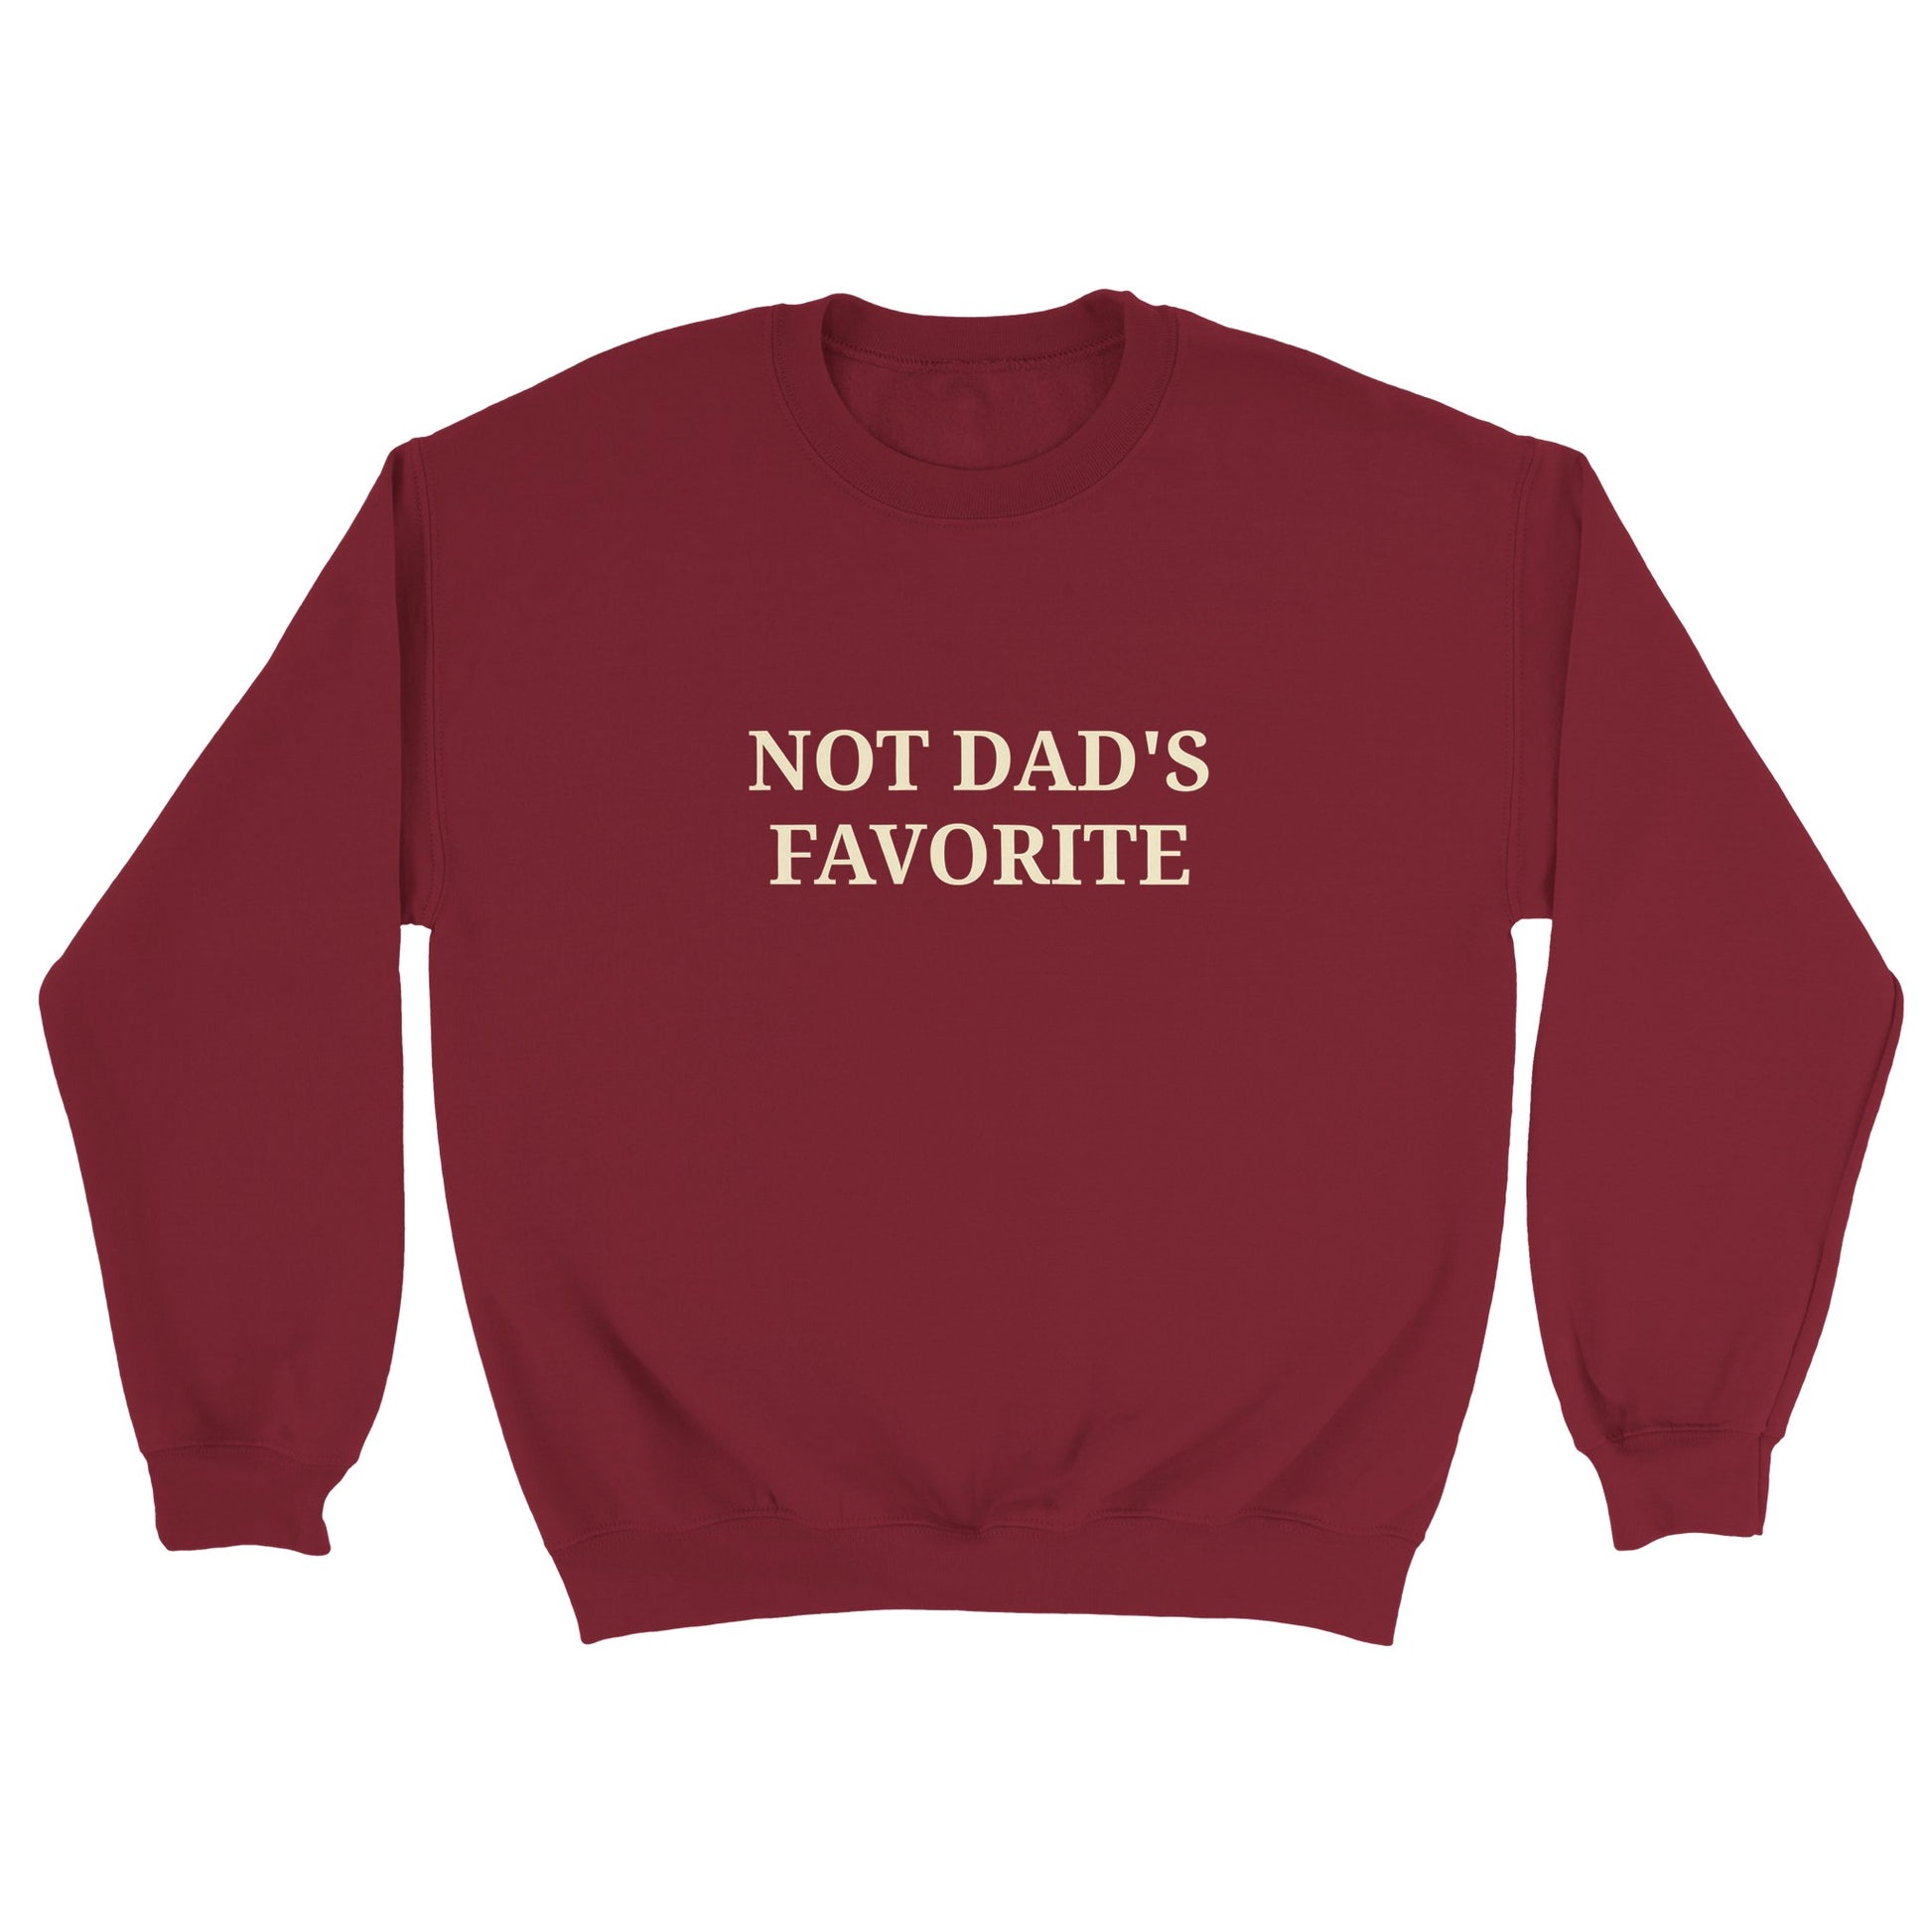 a red sweatshirt with "Not dad's favorite" written across the chest